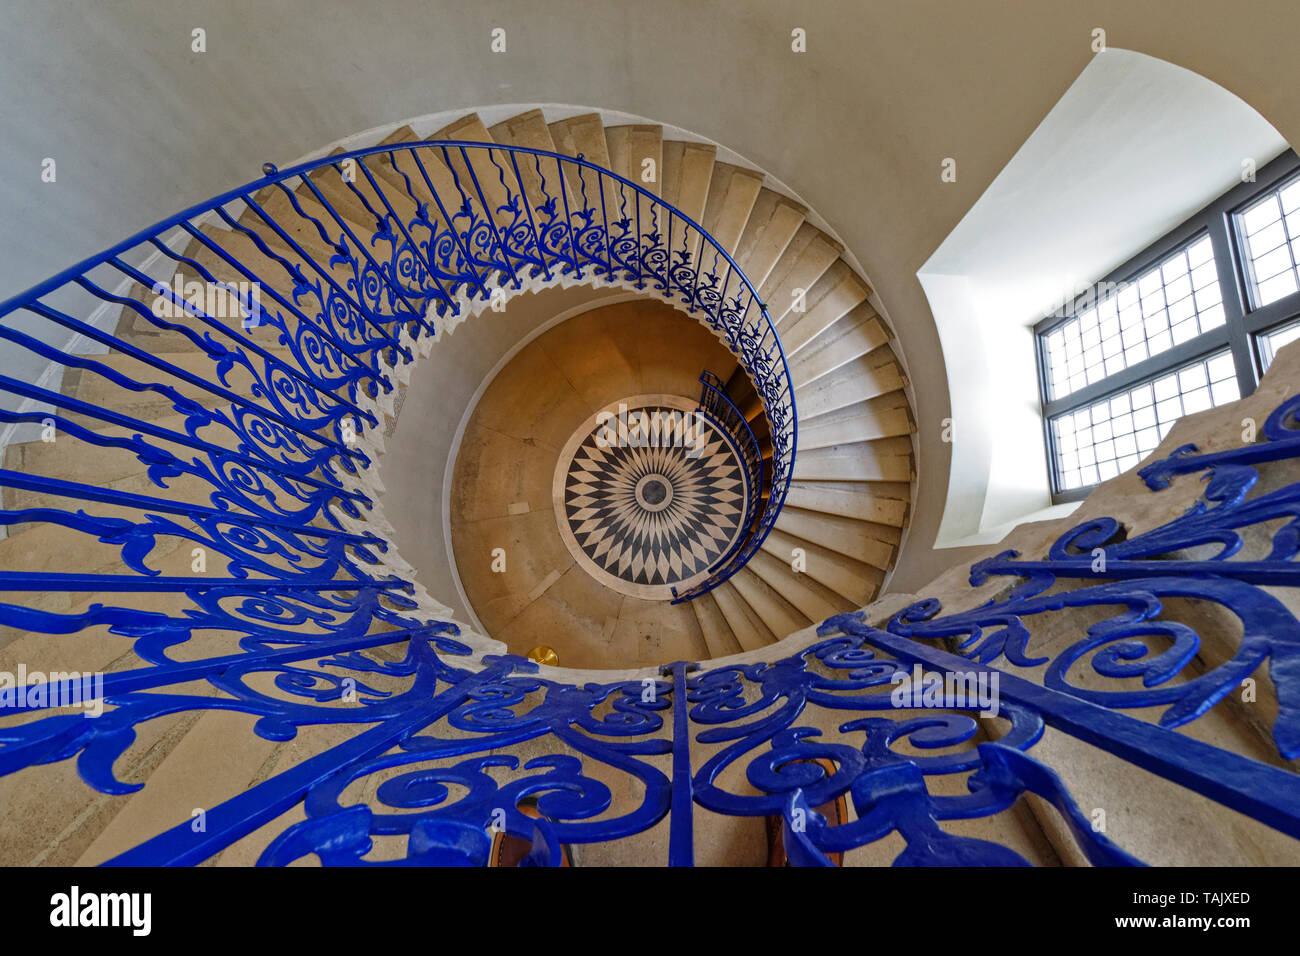 LONDON GREENWICH TULIP STAIRCASE IN THE QUEENS HOUSE LOOKING DOWNWARDS Stock Photo